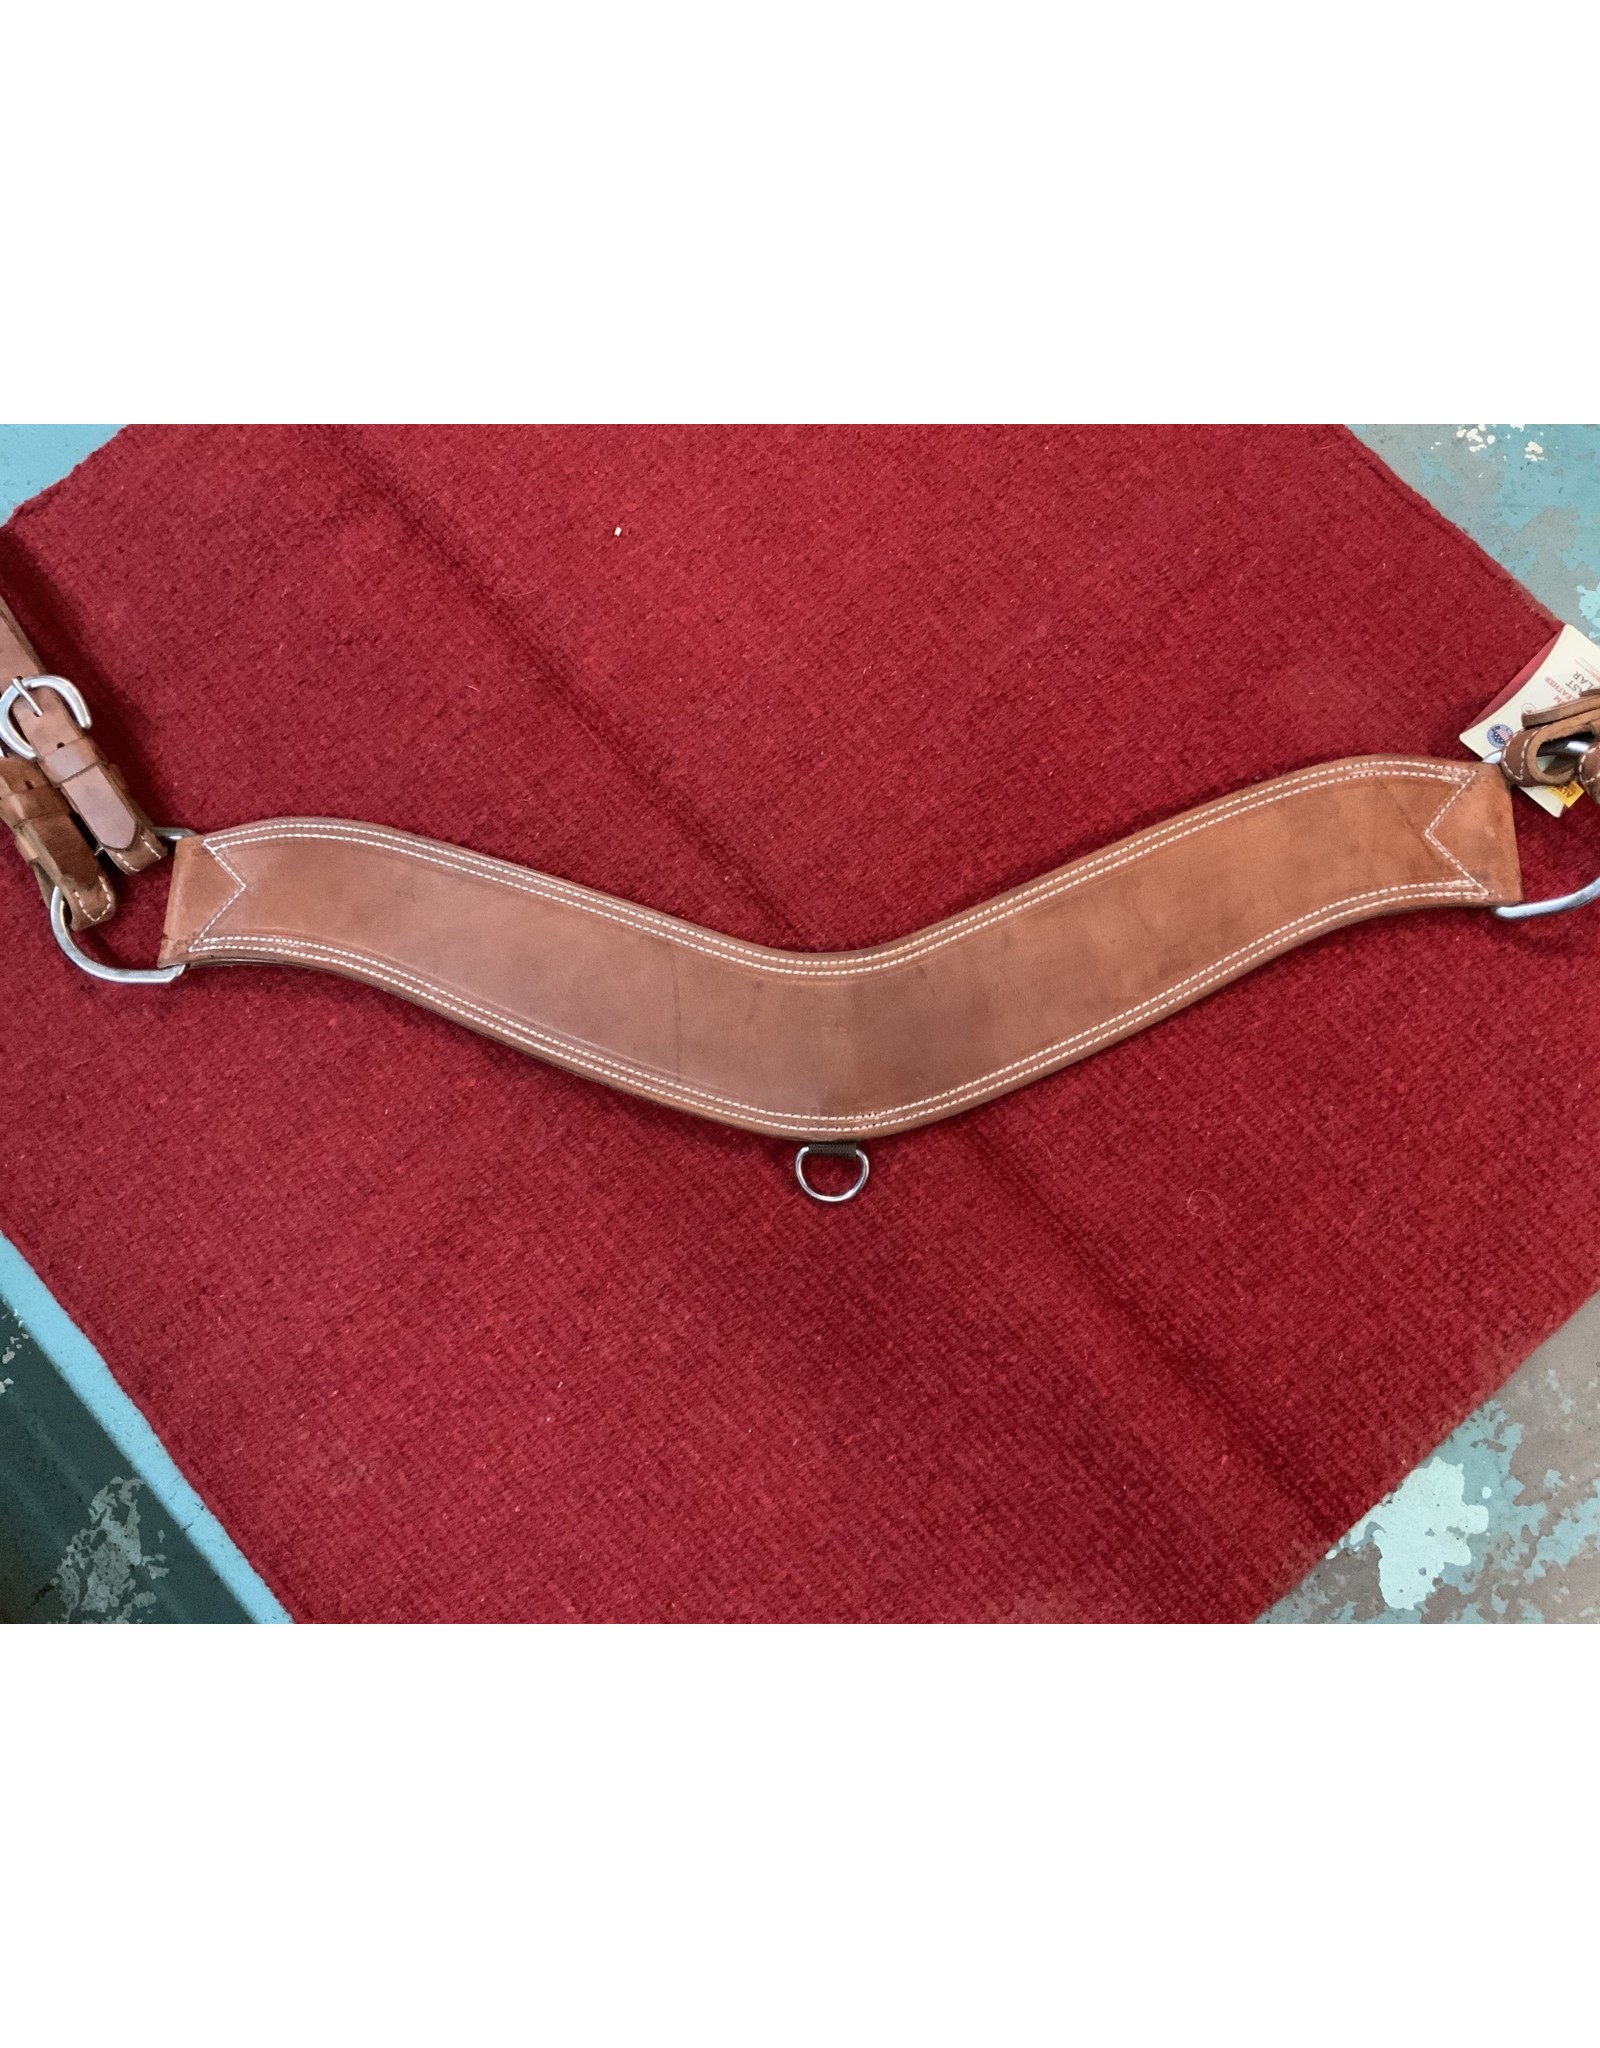 BB* Harness Leather - Heavy Duty Steer Tripping Collar - #40-0923